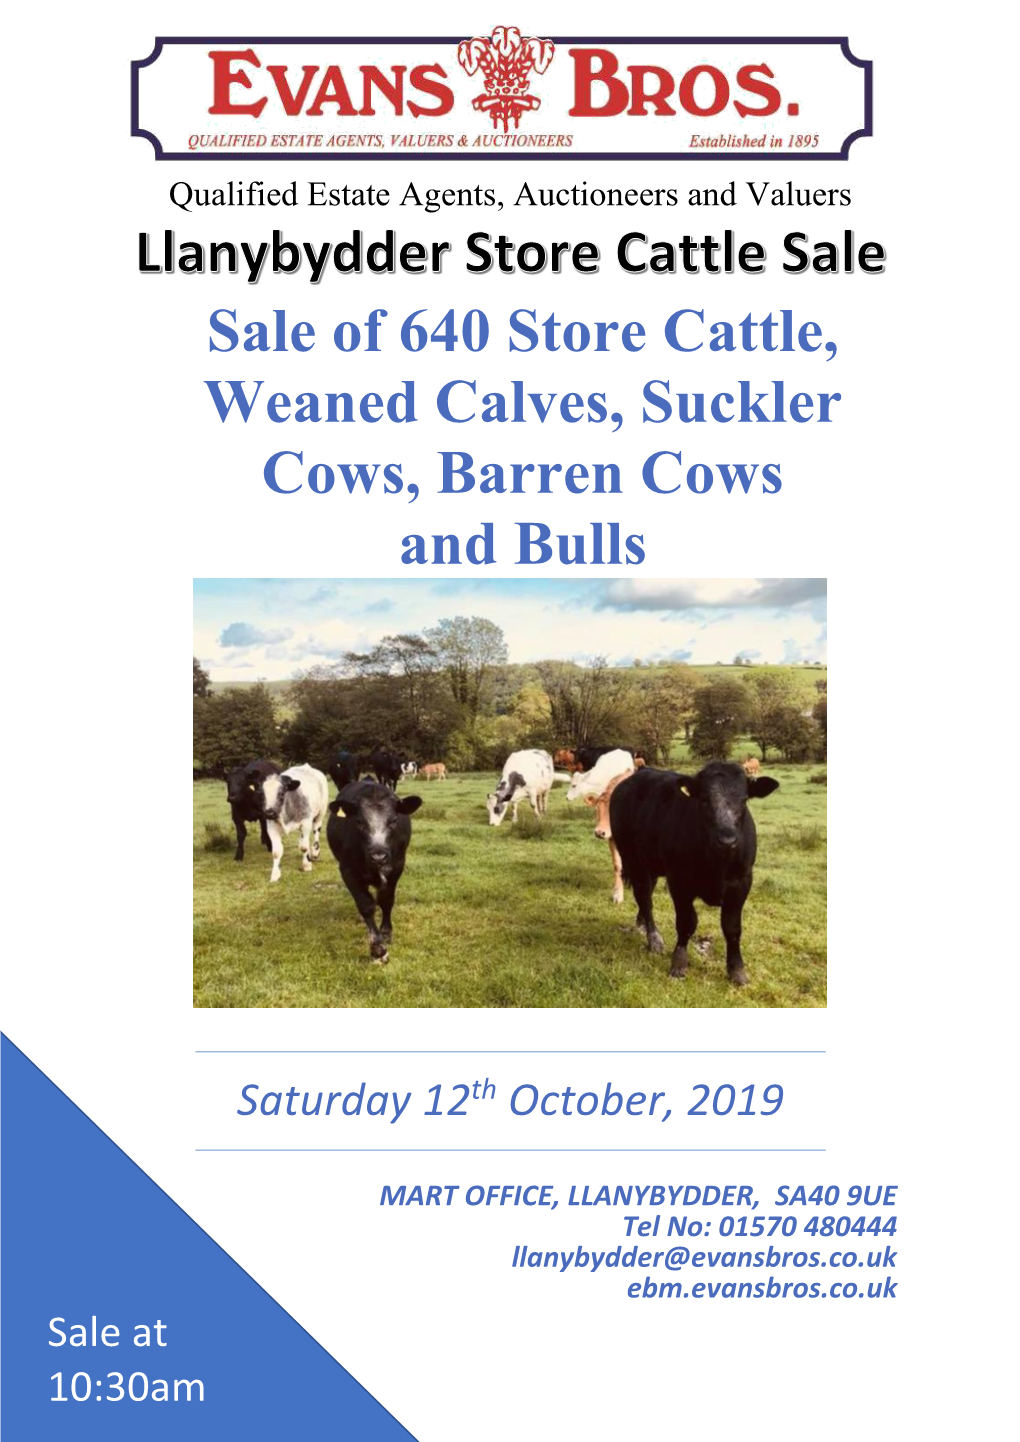 Sale of 640 Store Cattle, Weaned Calves, Suckler Cows, Barren Cows and Bulls